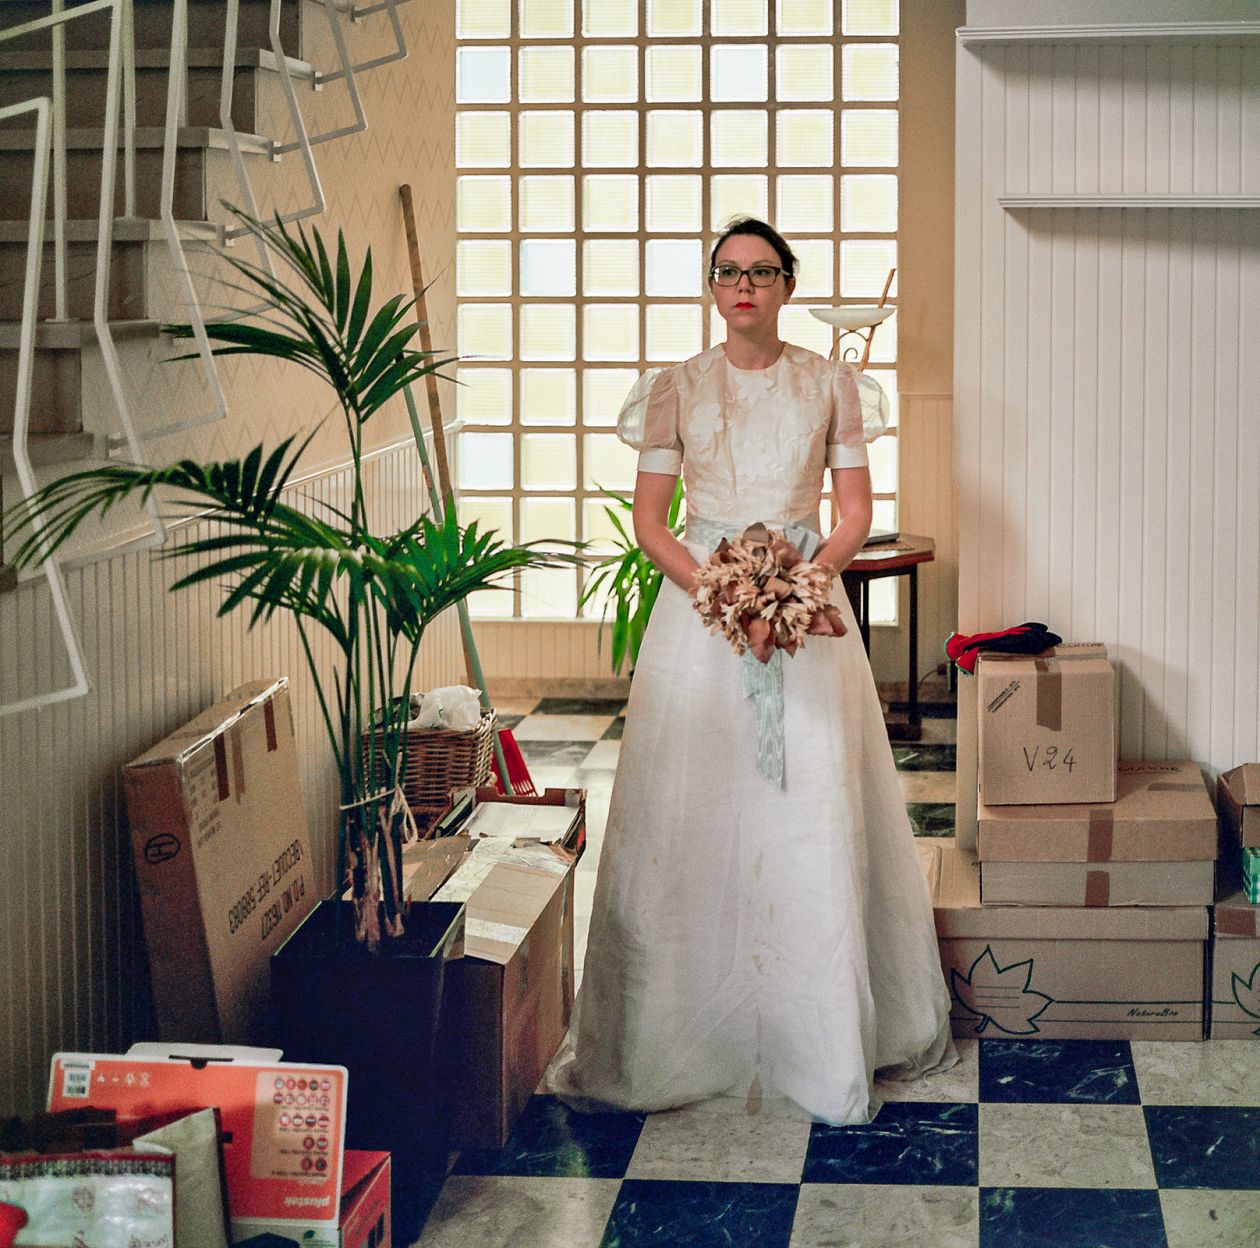 bride with a bouquet of flowers in her hands standing in her room